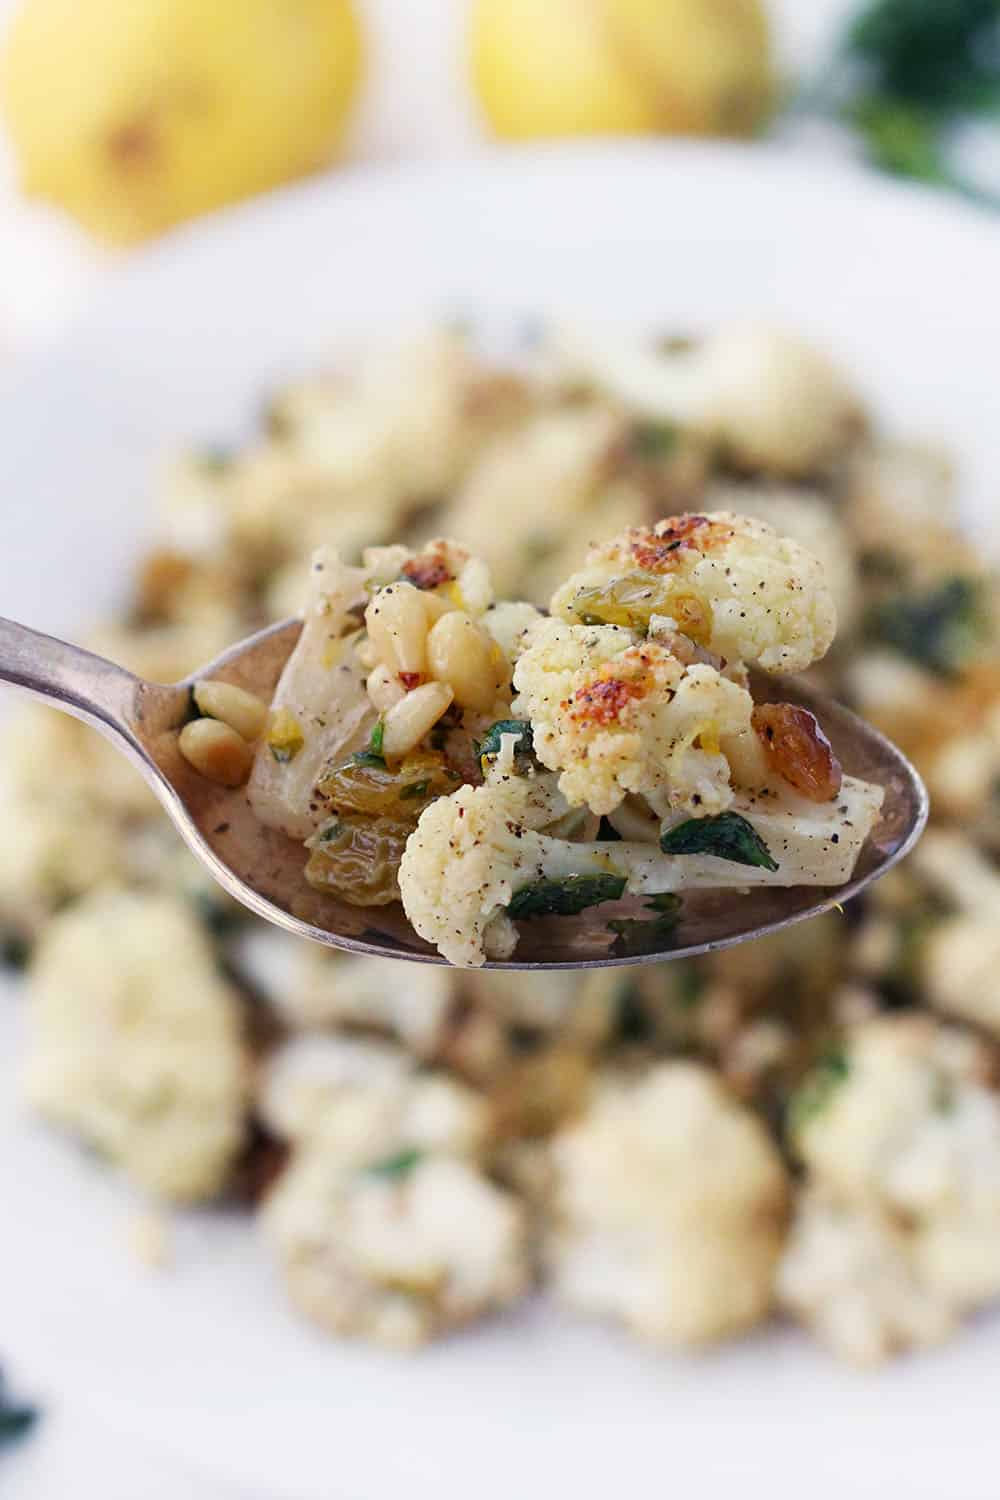 This roasted cauliflower with pine nuts and raisins is a delicious side dish served warm or cold. Tossed with a lemon and olive oil vinaigrette and fresh parsley, it's a fresh Mediterranean recipe that goes with just about anything! Capers or olives can be substituted for raisins for a saltier, lower carb version.